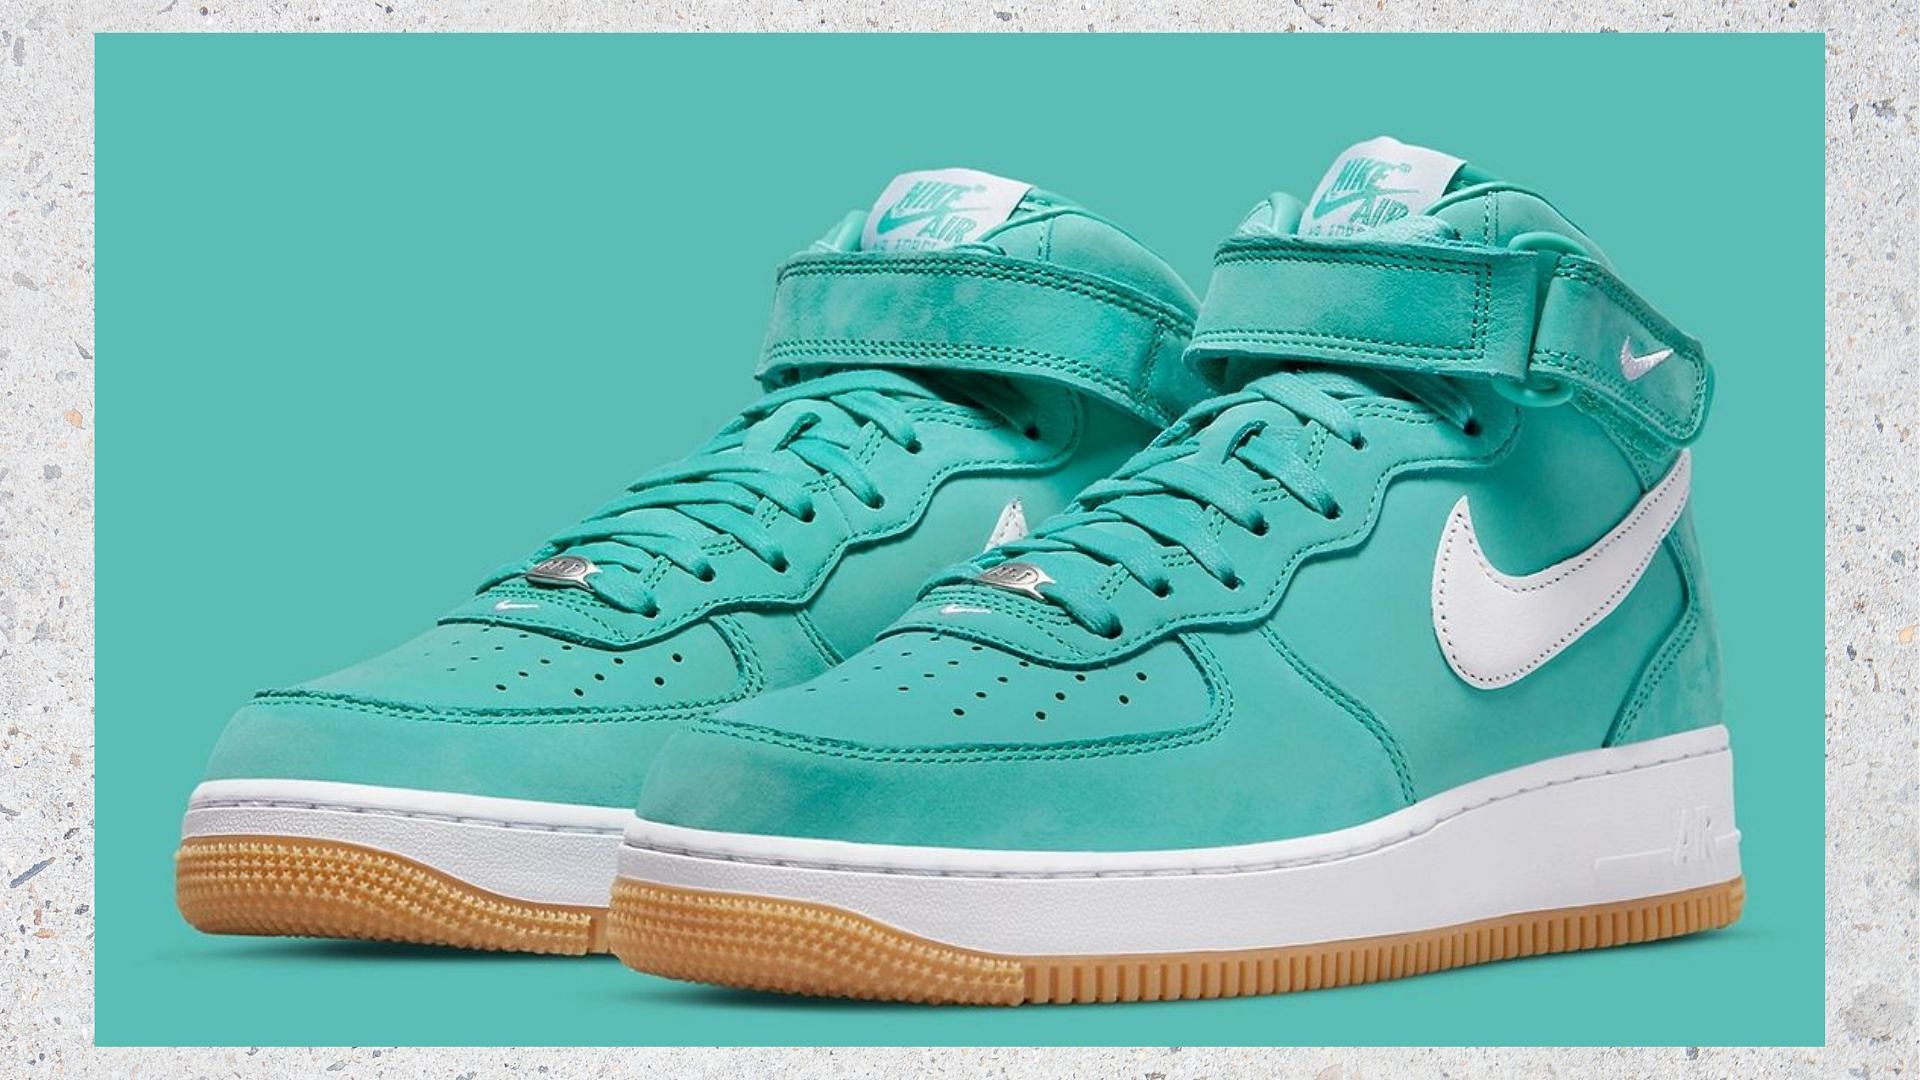 Nike Air Force 1 Mid &quot;Washed Teal&quot; sneakers (Image via Nike)